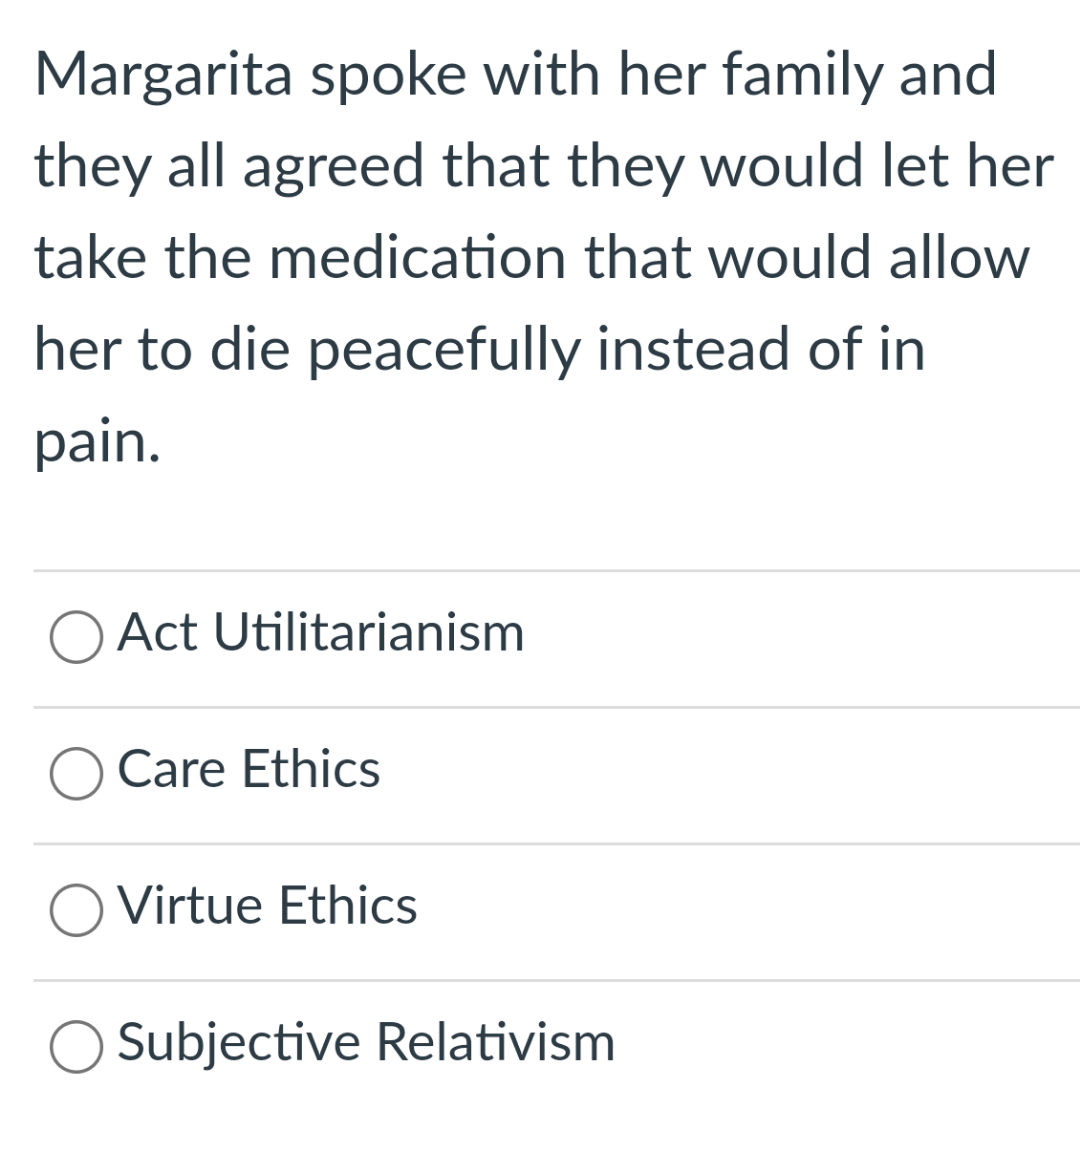 Margarita spoke with her family and
they all agreed that they would let her
take the medication that would allow
her to die peacefully instead of in
pain.
Act Utilitarianism
Care Ethics
O Virtue Ethics
Subjective Relativism